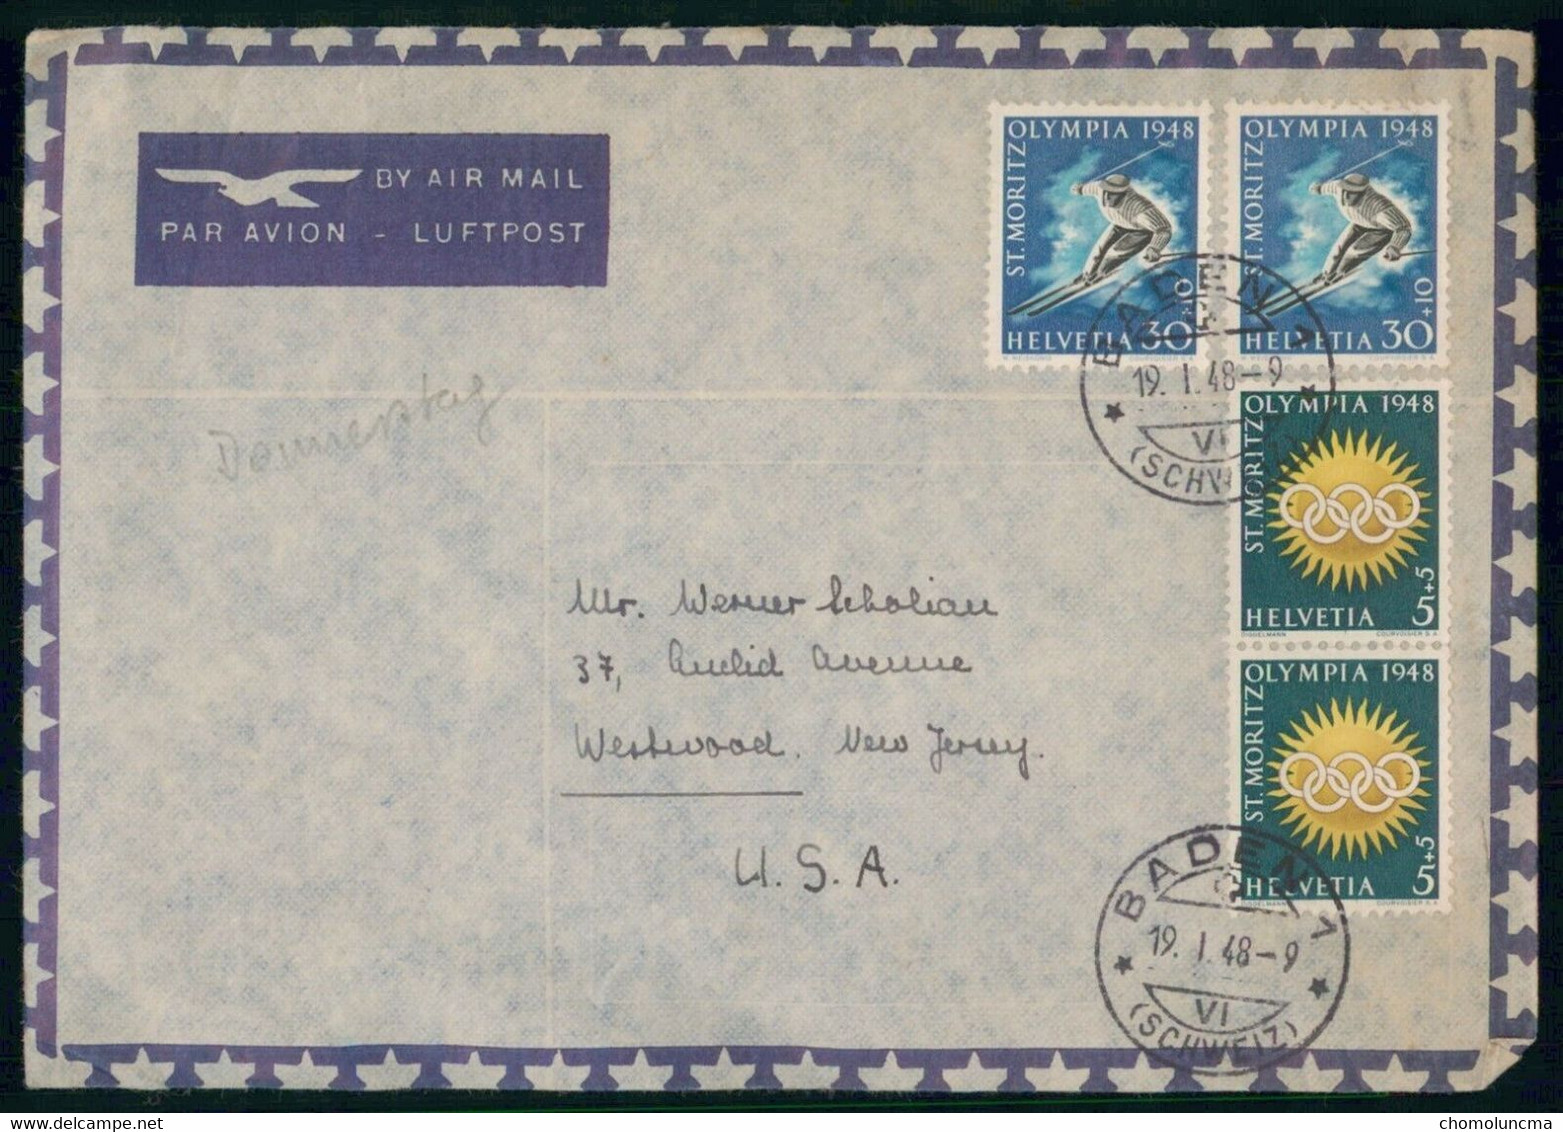 1948 St Moritz Winter Olympic Games Jeux Olympiques D'Hiver Olympische Winterspiele Cover To Westwood USA - Invierno 1948: St-Moritz